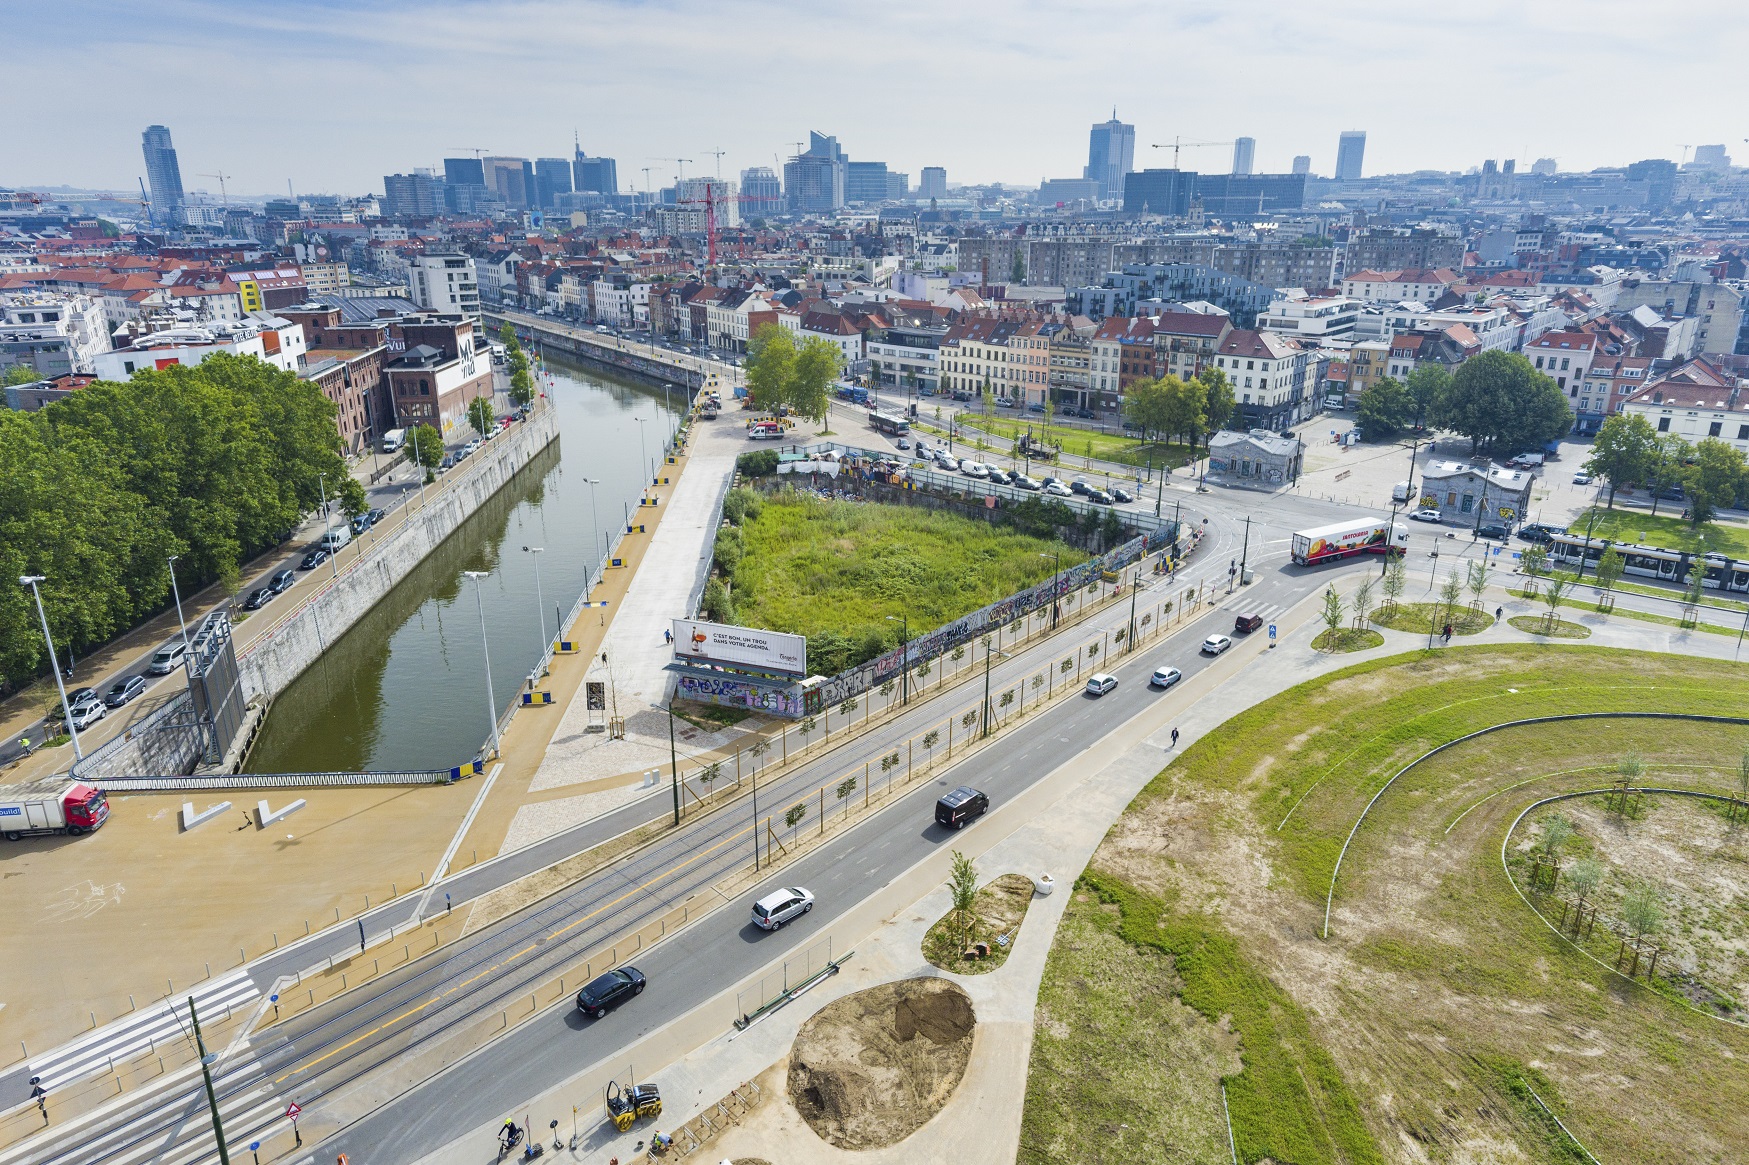 The rebirth of the Brussels Canal